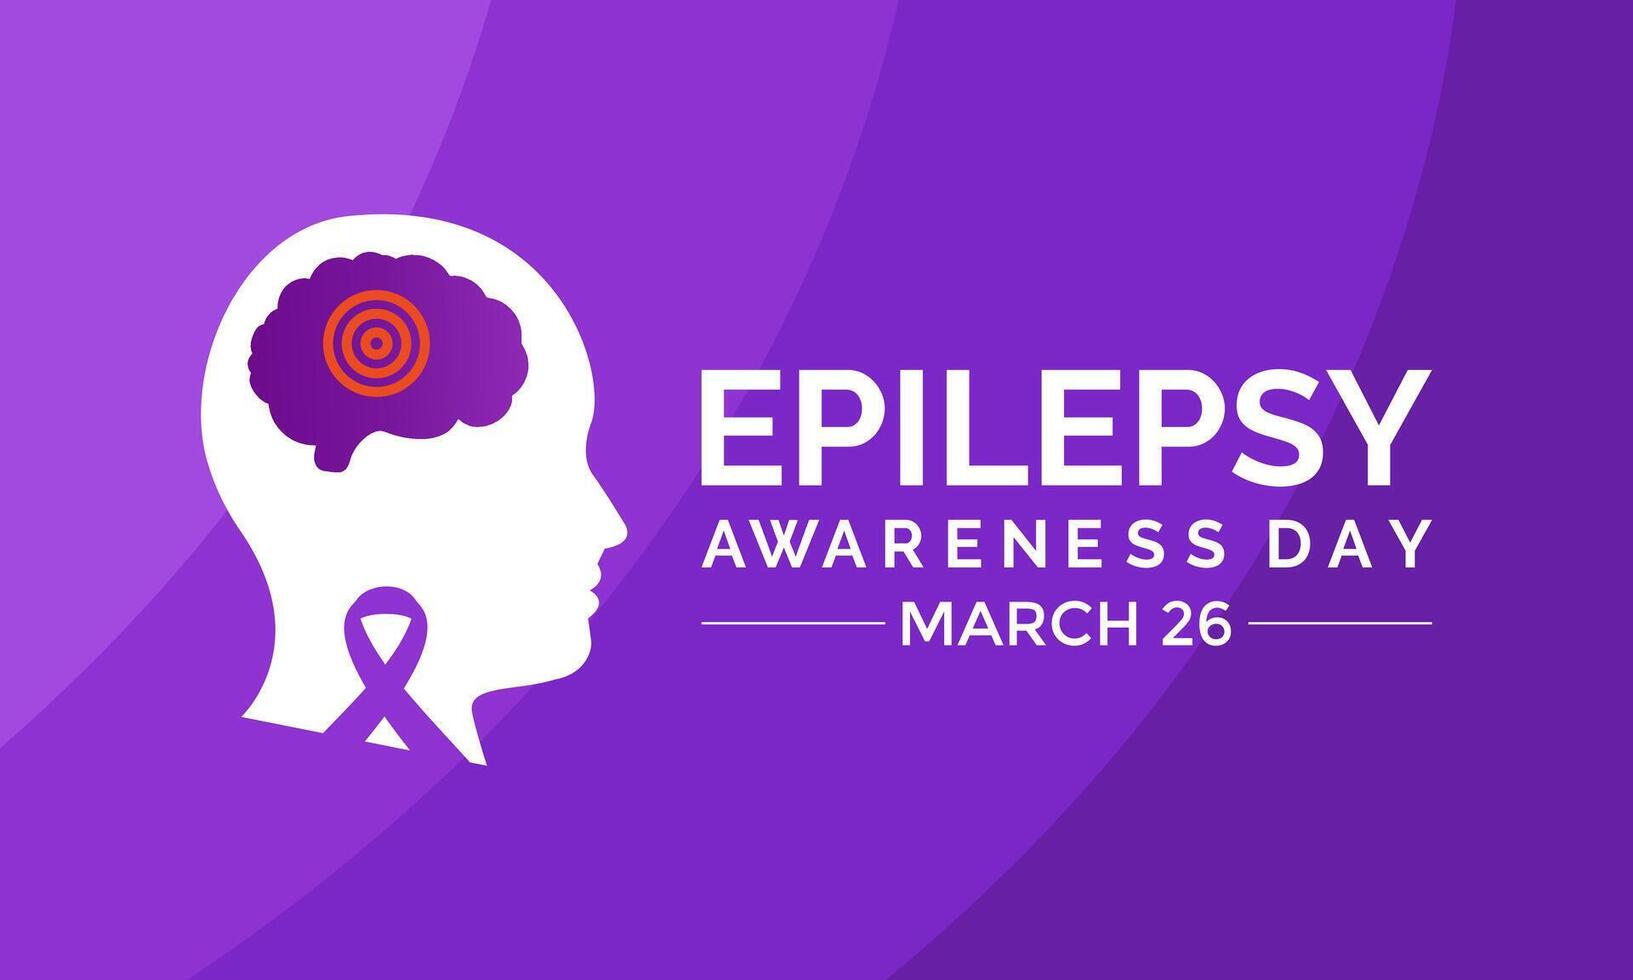 Epilepsy awareness day each year on March 26th. Greeting card, poster, flyer and Banner, background design. vector